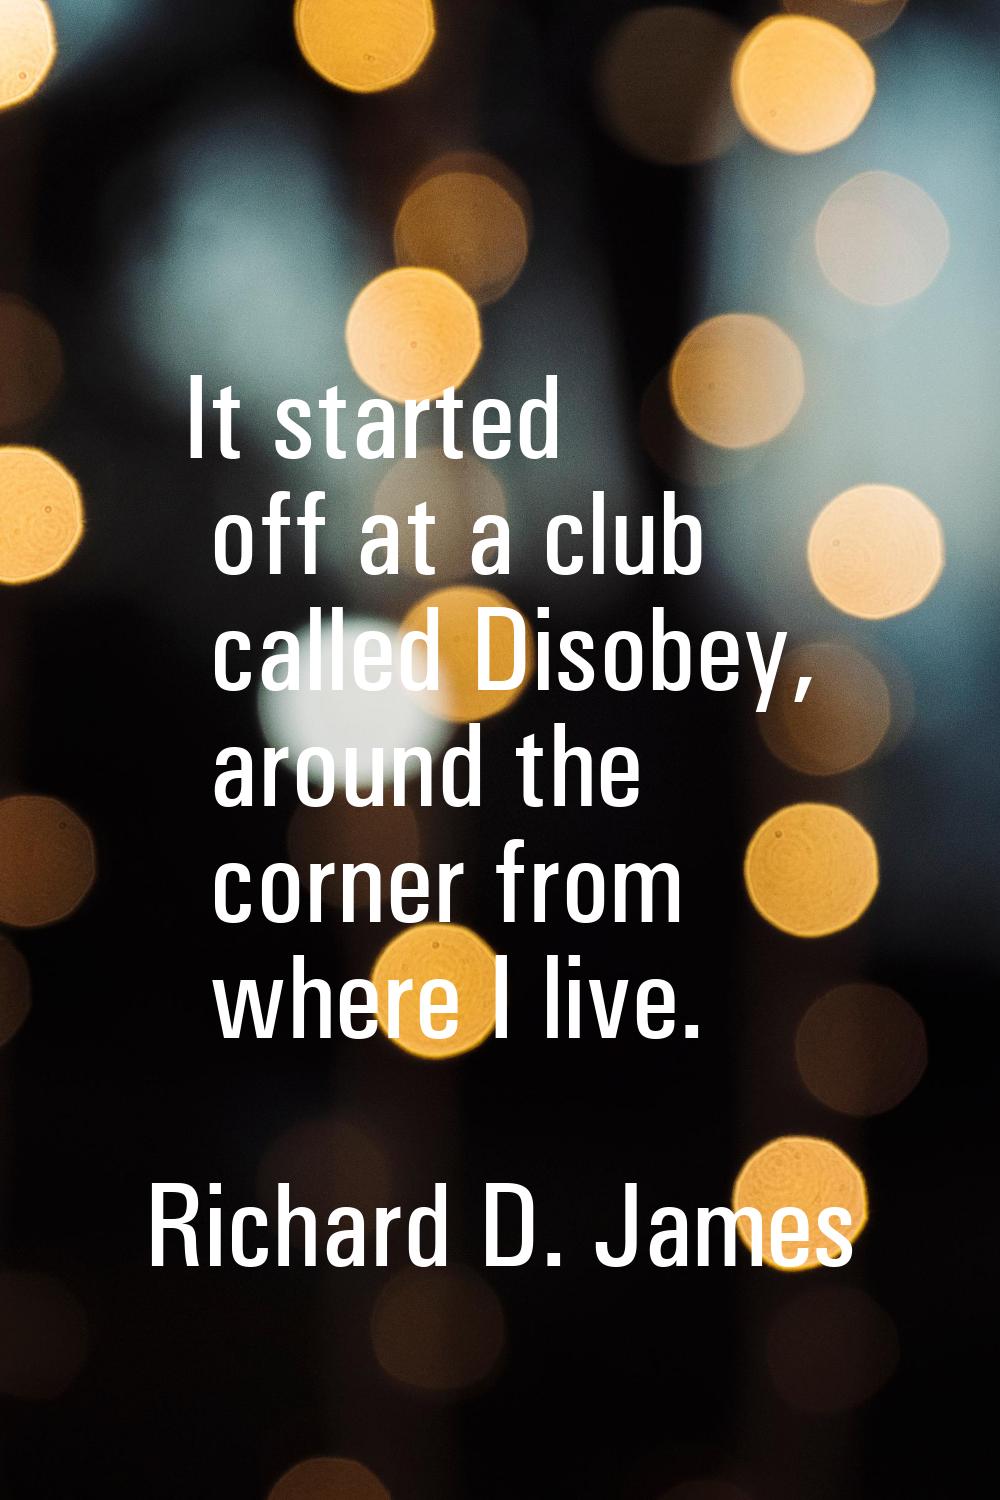 It started off at a club called Disobey, around the corner from where I live.